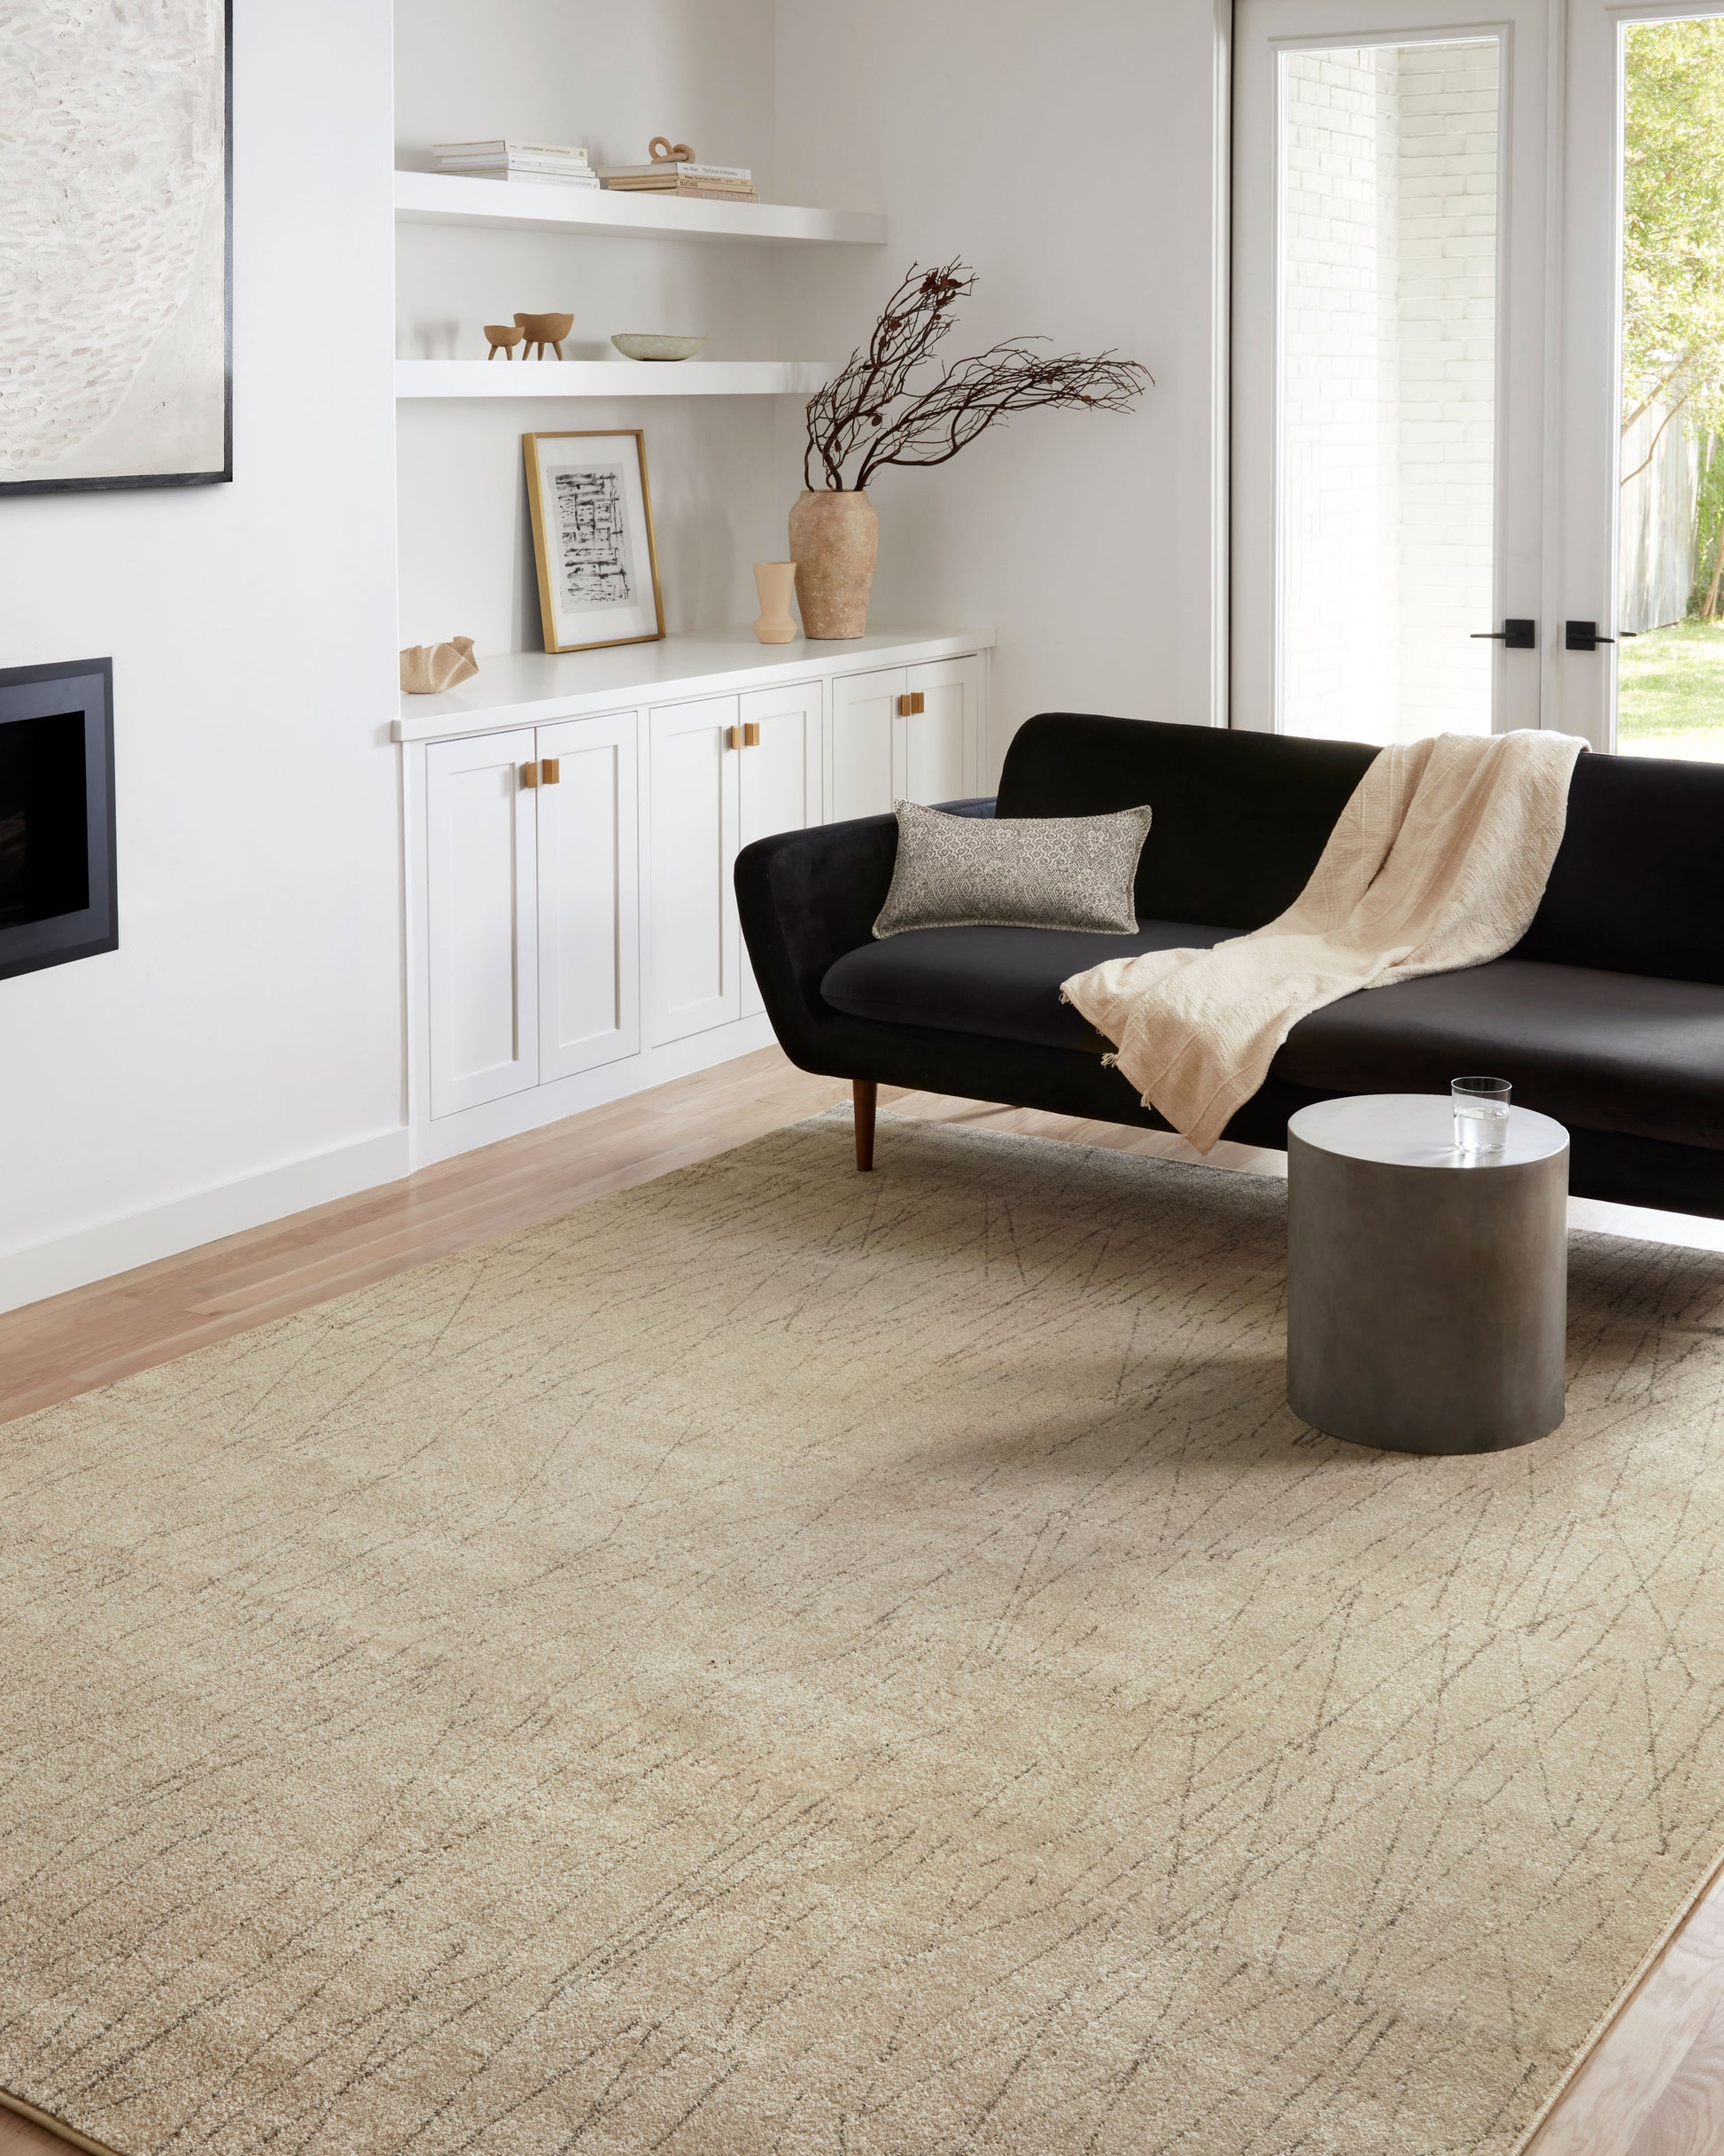 Loloi Bowery Bow-05 Beige/Pepper Area Rug